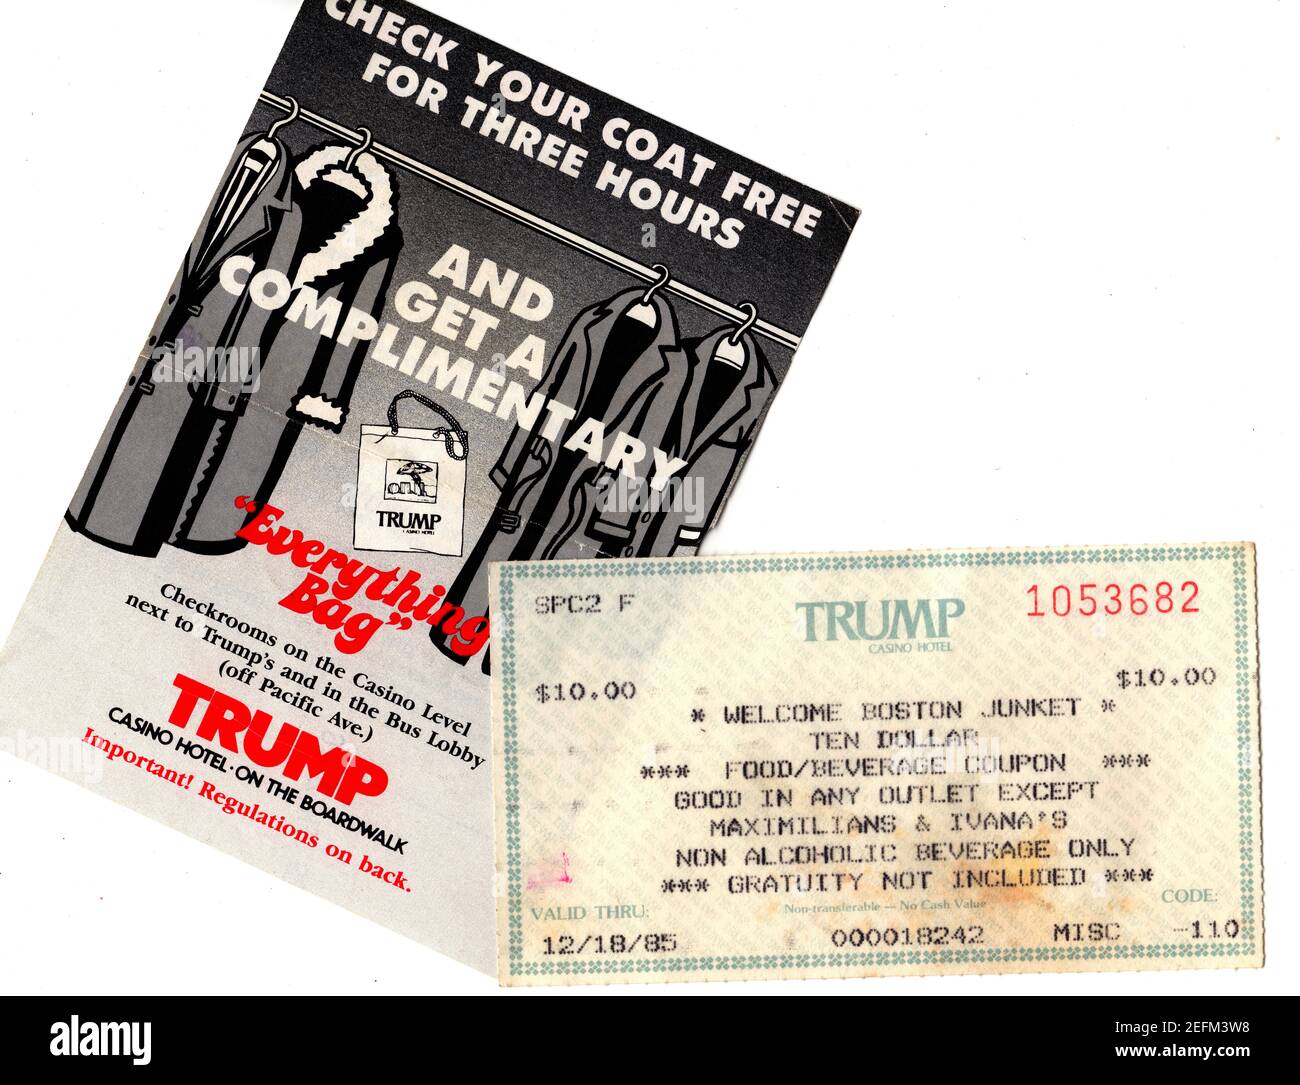 Souvenir casino tickets 1985-1986 from Trump's Casino and Hotel on the Boardwalk in Atlantic City, New Jersey. The hotel was imploded on February 17, 2021. Stock Photo